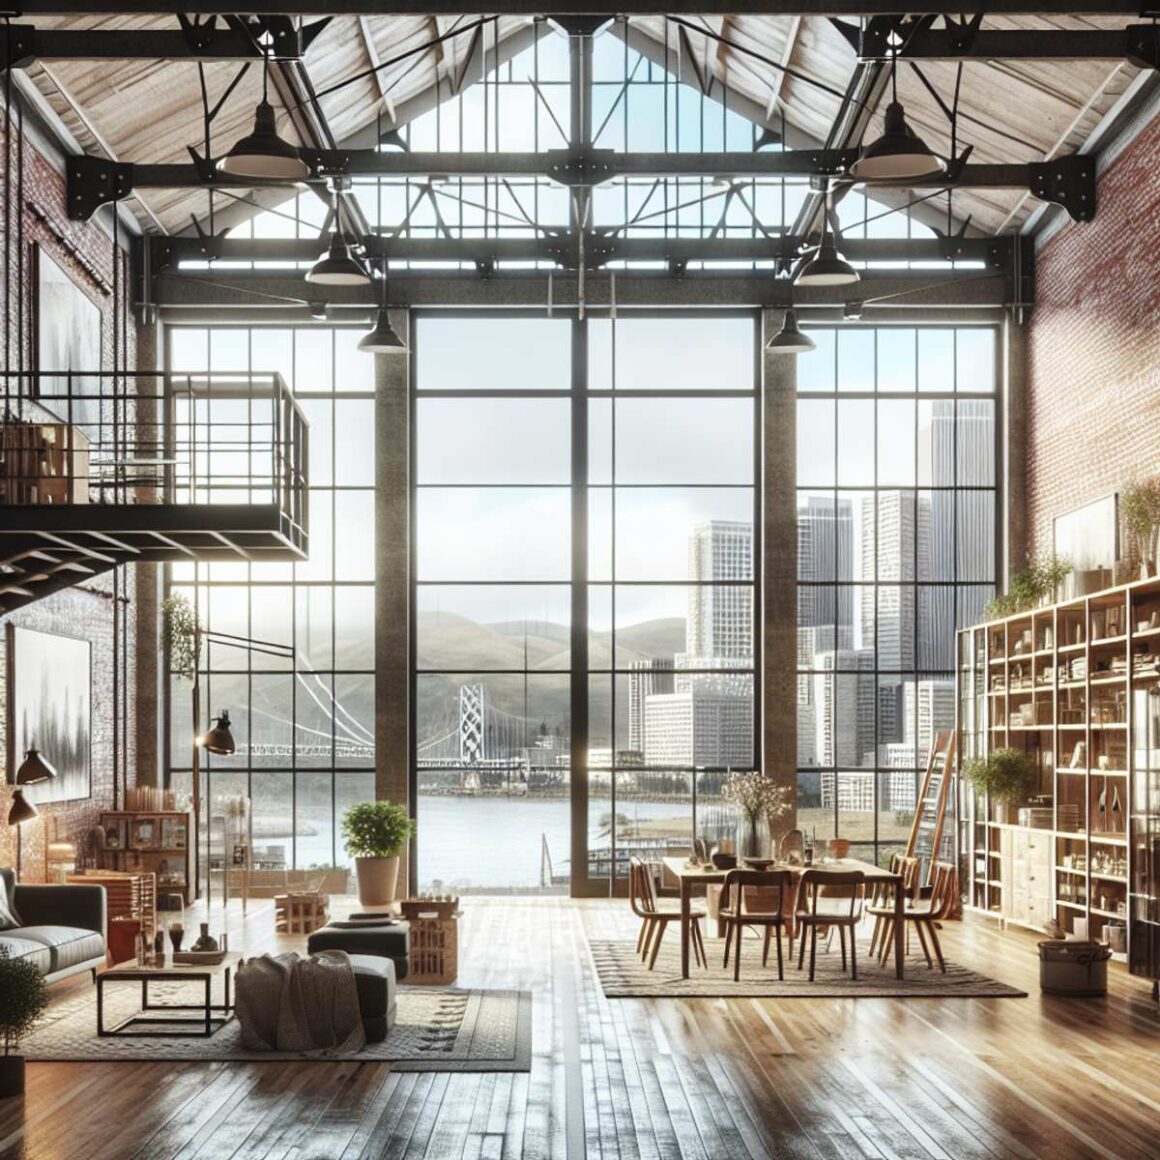 A modern loft apartment with high ceilings, exposed brick walls, and a blend of industrial and Japandi aesthetics.